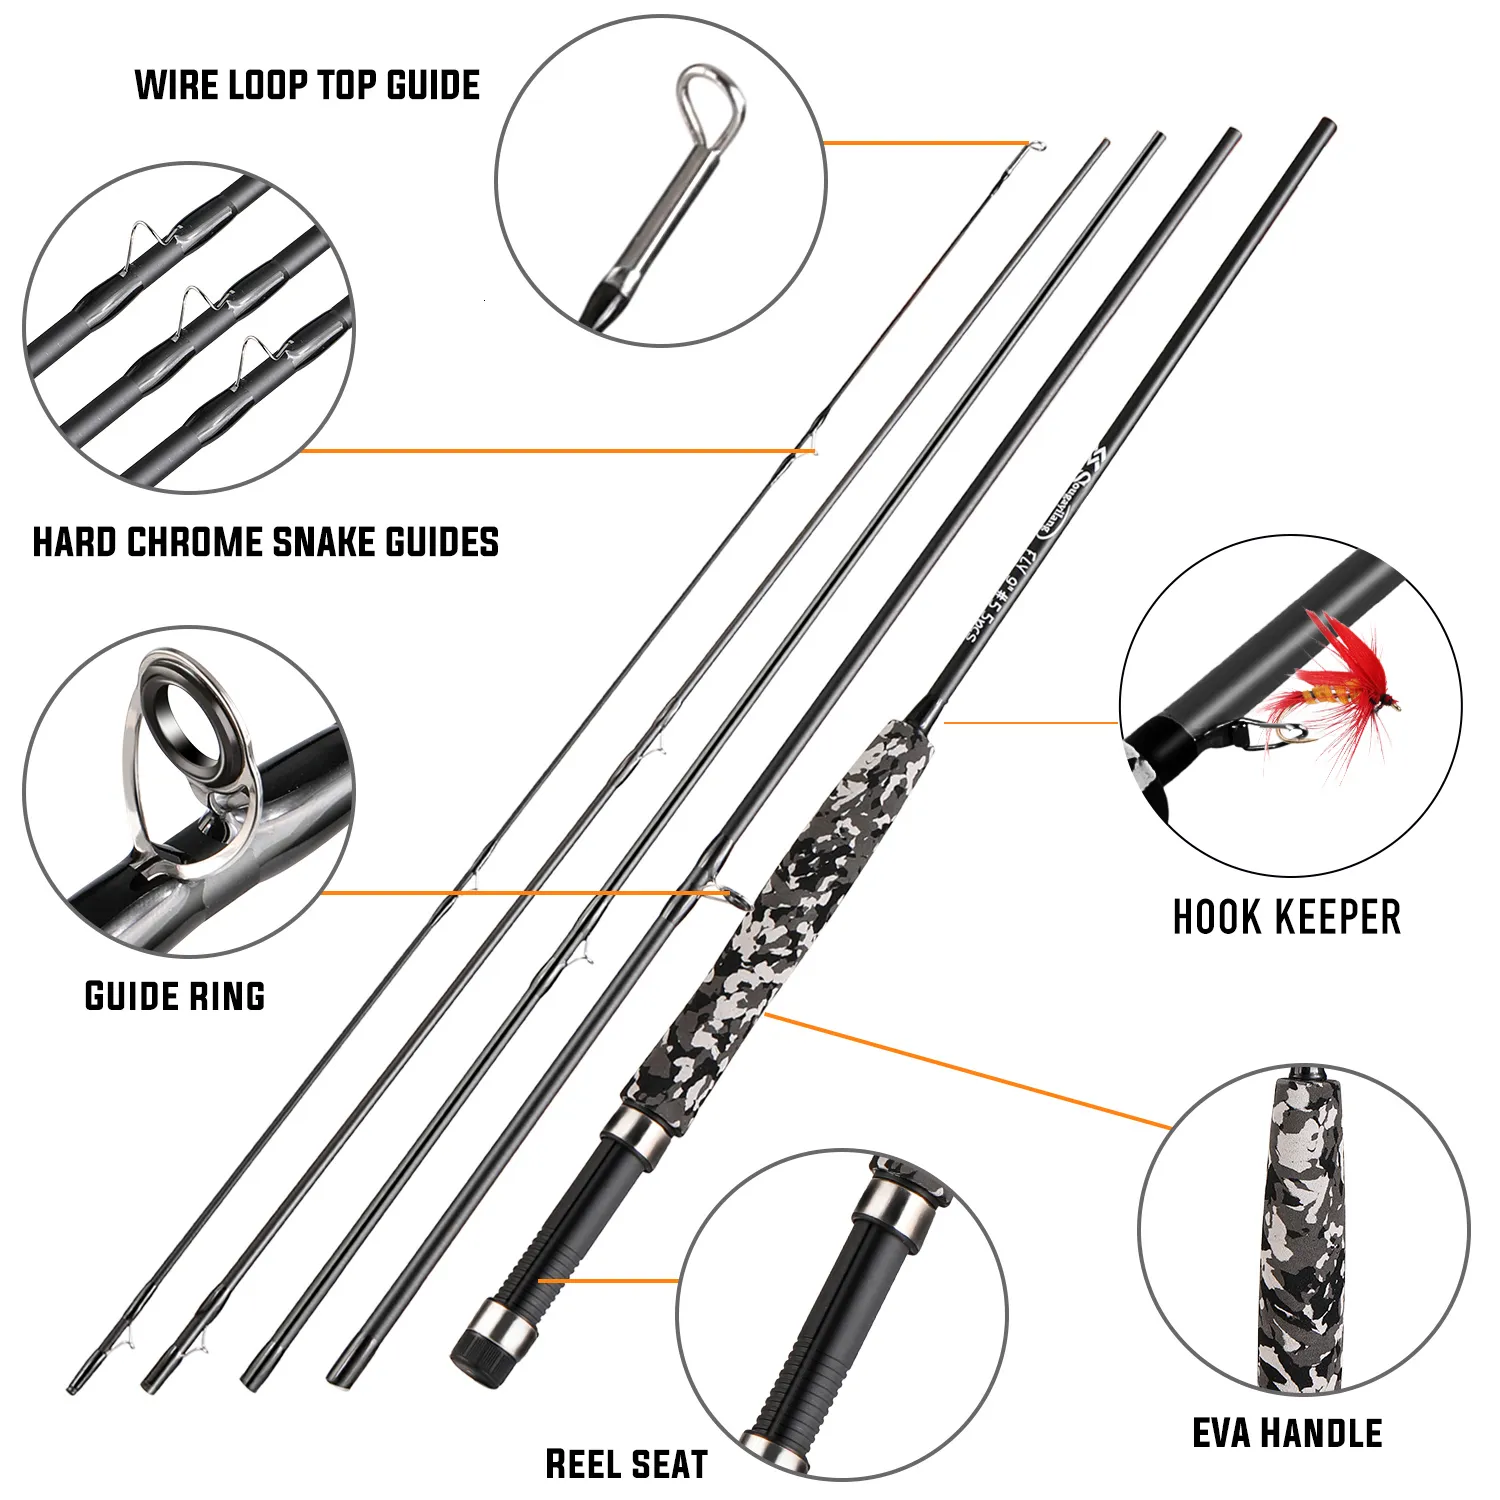 Sougayilang 5 Fly Rod Lightweight, Ultra Portable, Carbon Fiber Graphite,  EVA A Handle Ideal For Boat Fishing And Travel 230520 From Zhi09, $35.18